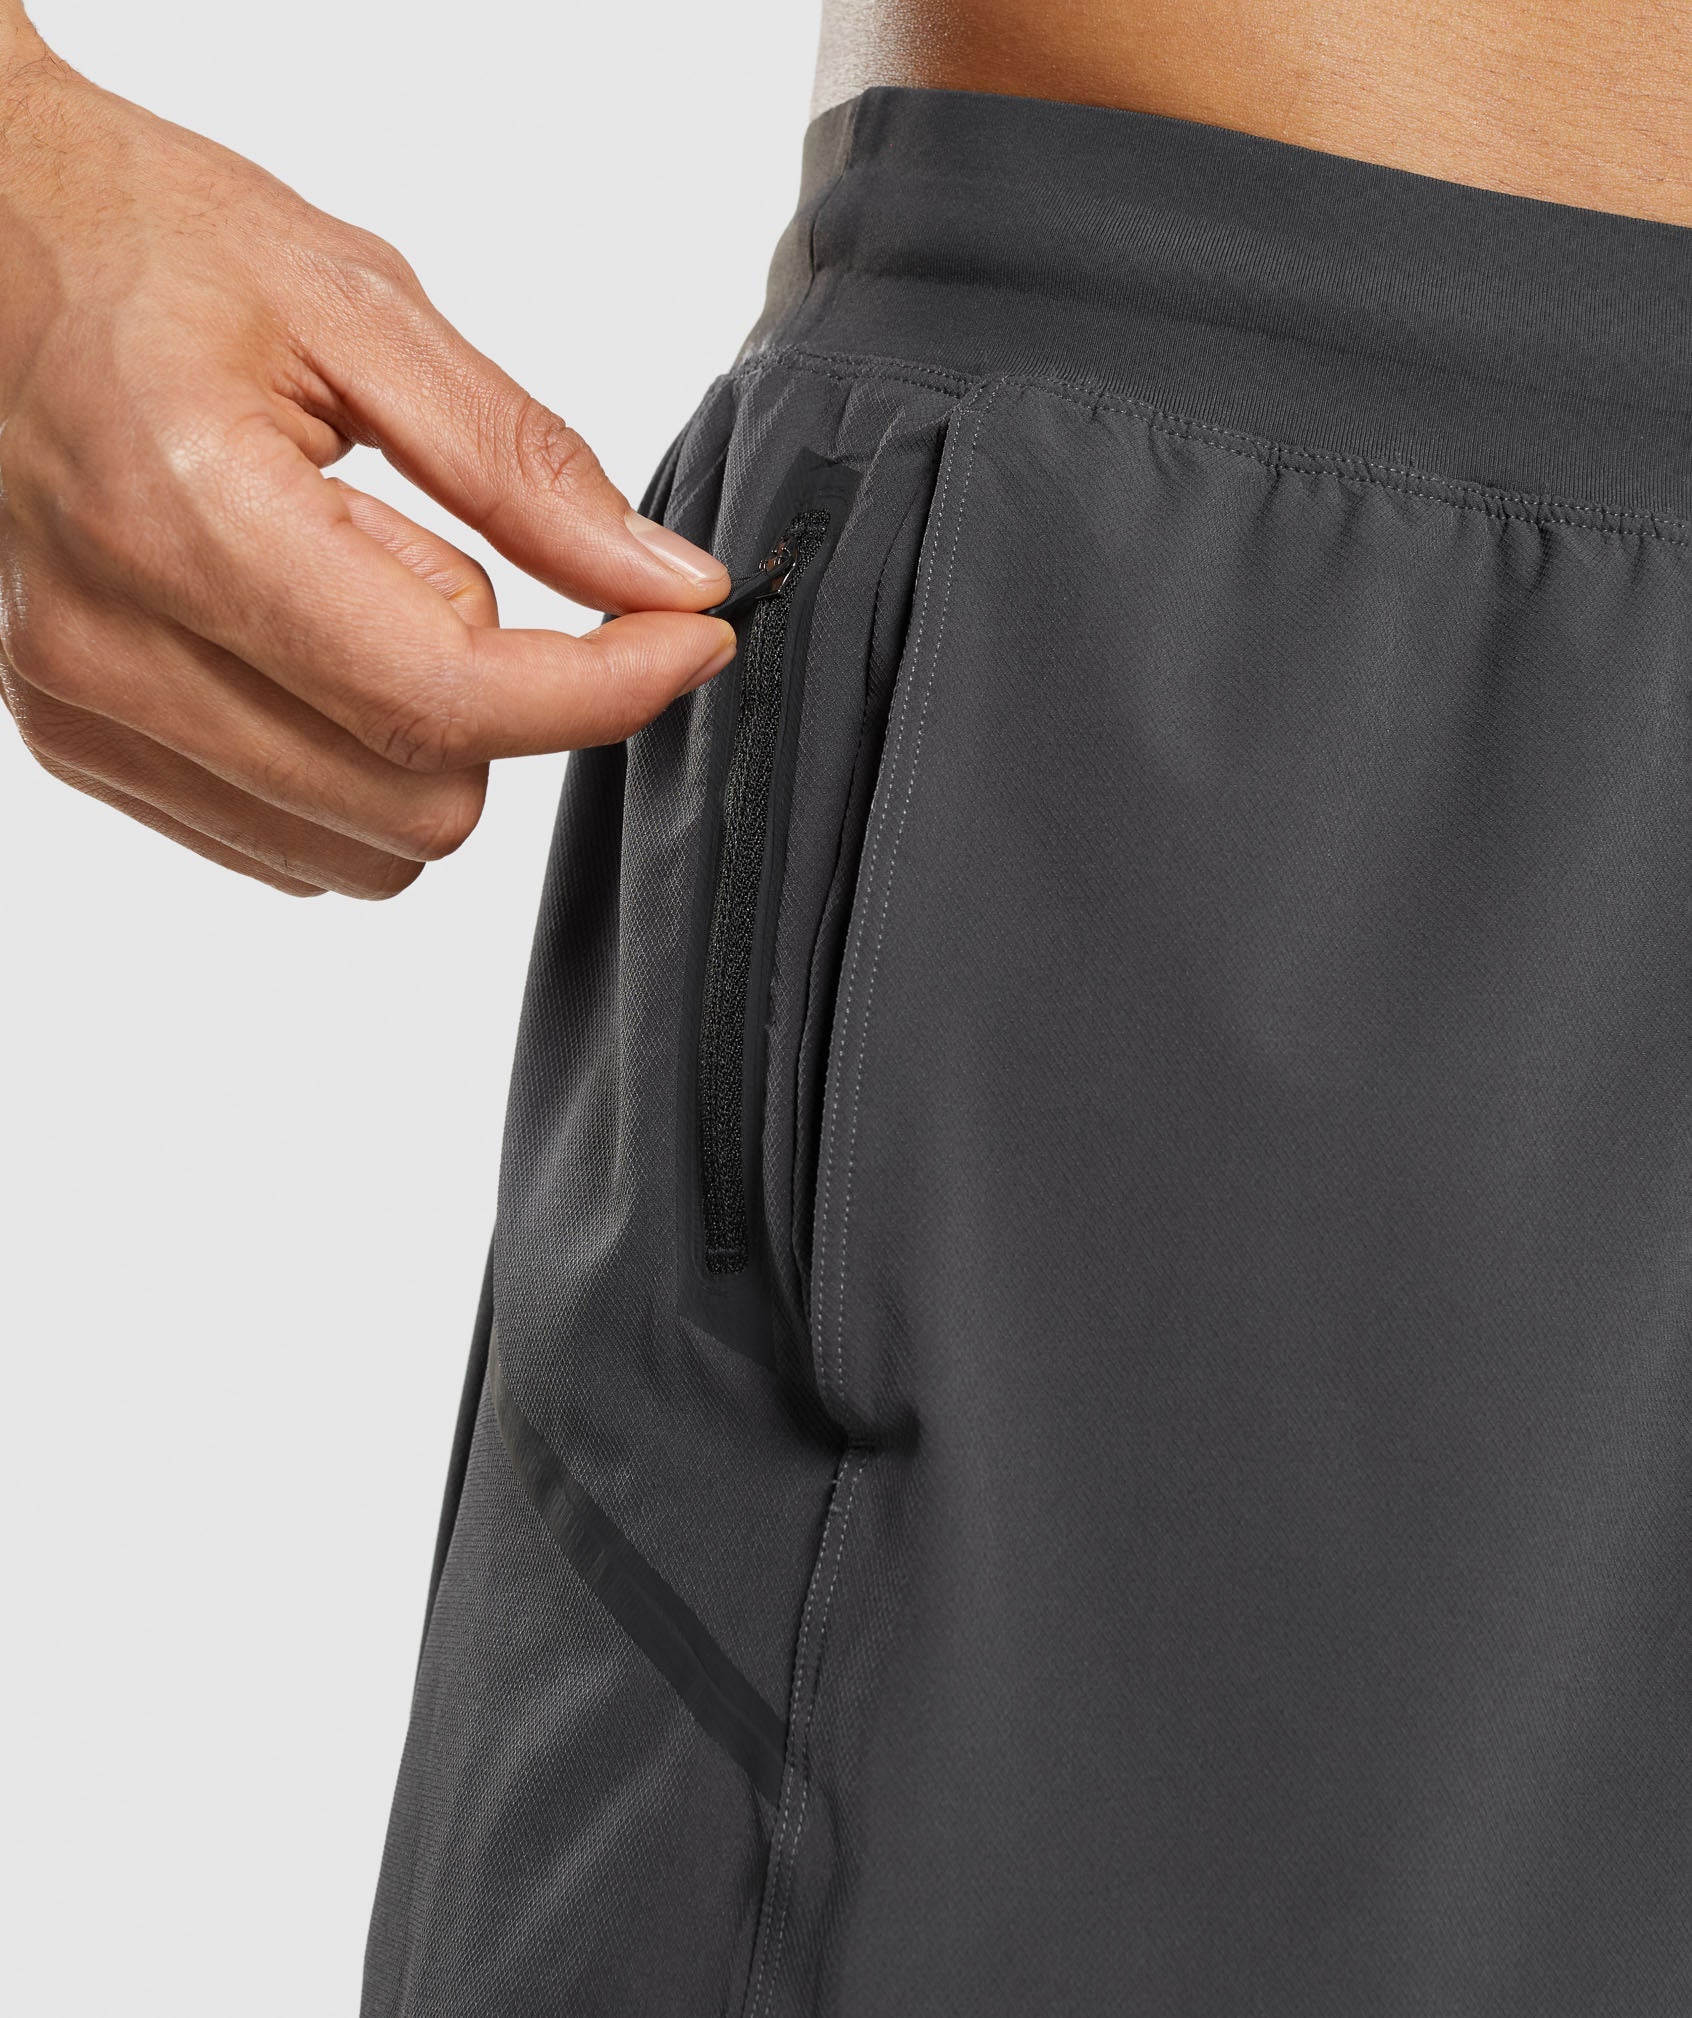 Apex 8" Function Shorts in Onyx Grey - view 6